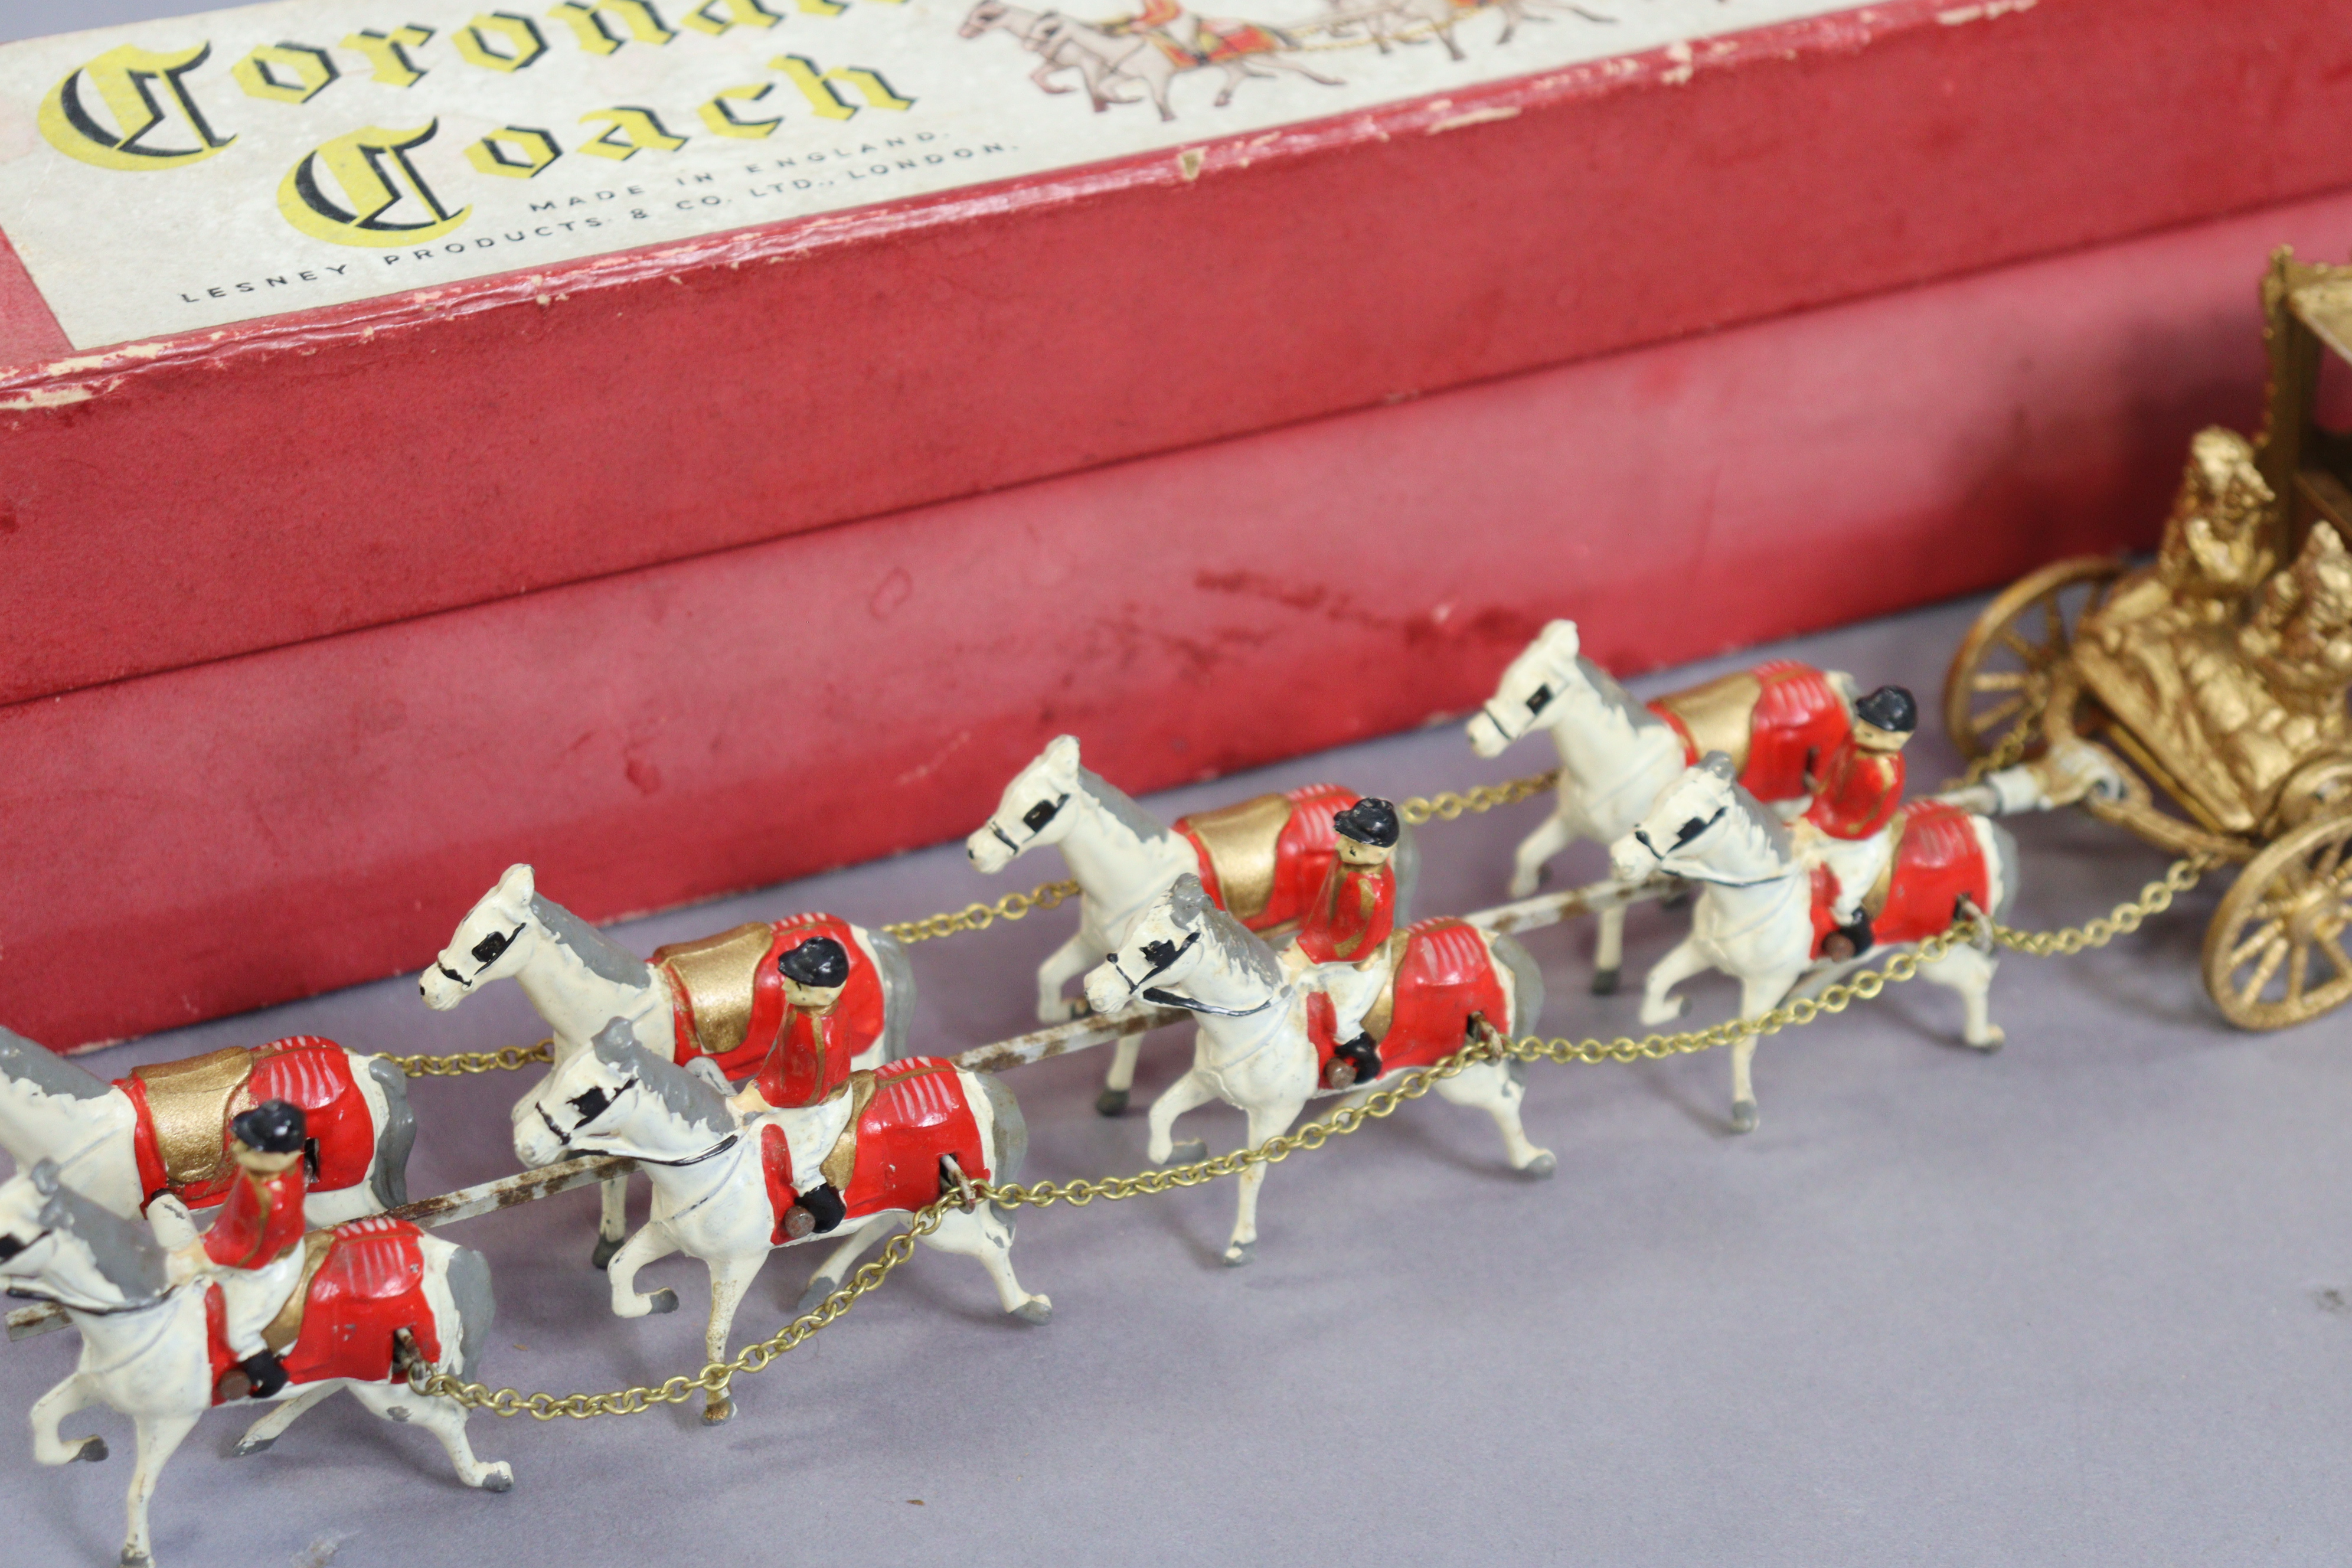 A vintage Lesney model of the “Coronation coach”, boxed. - Image 3 of 4